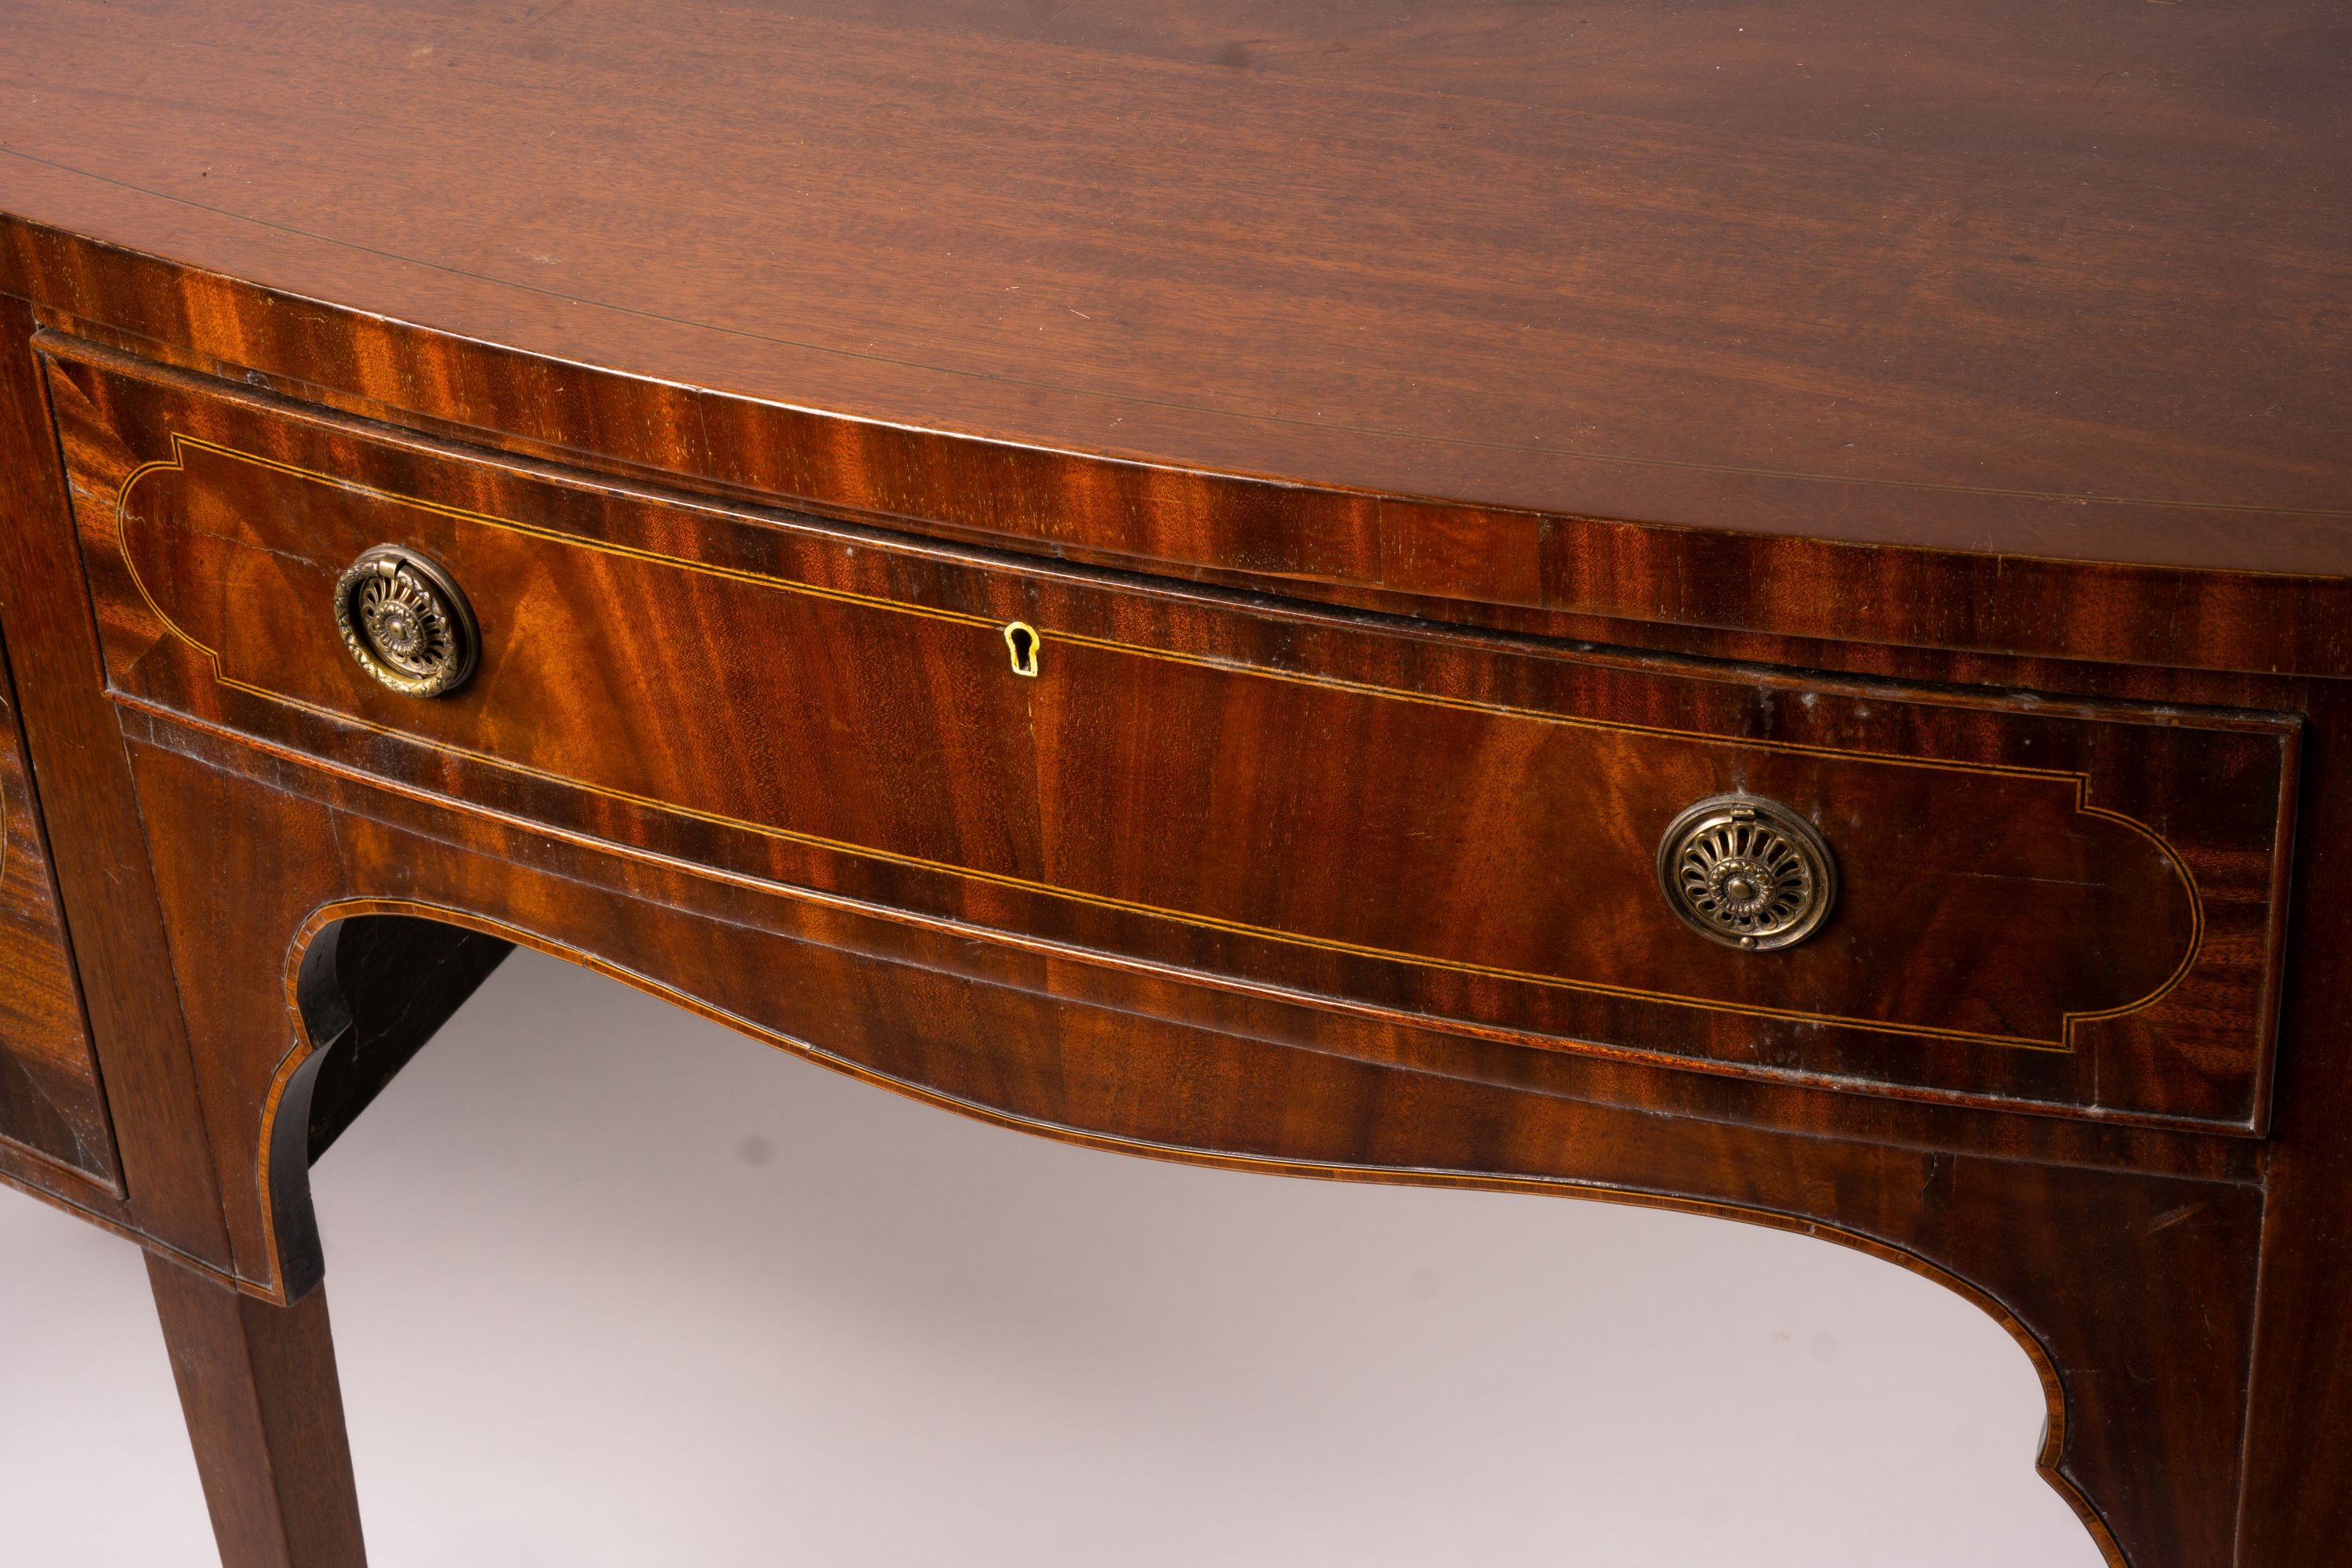 A George III style mahogany serpentine sideboard on square tapered legs, width 184cm, depth 63cm, height 93 cm